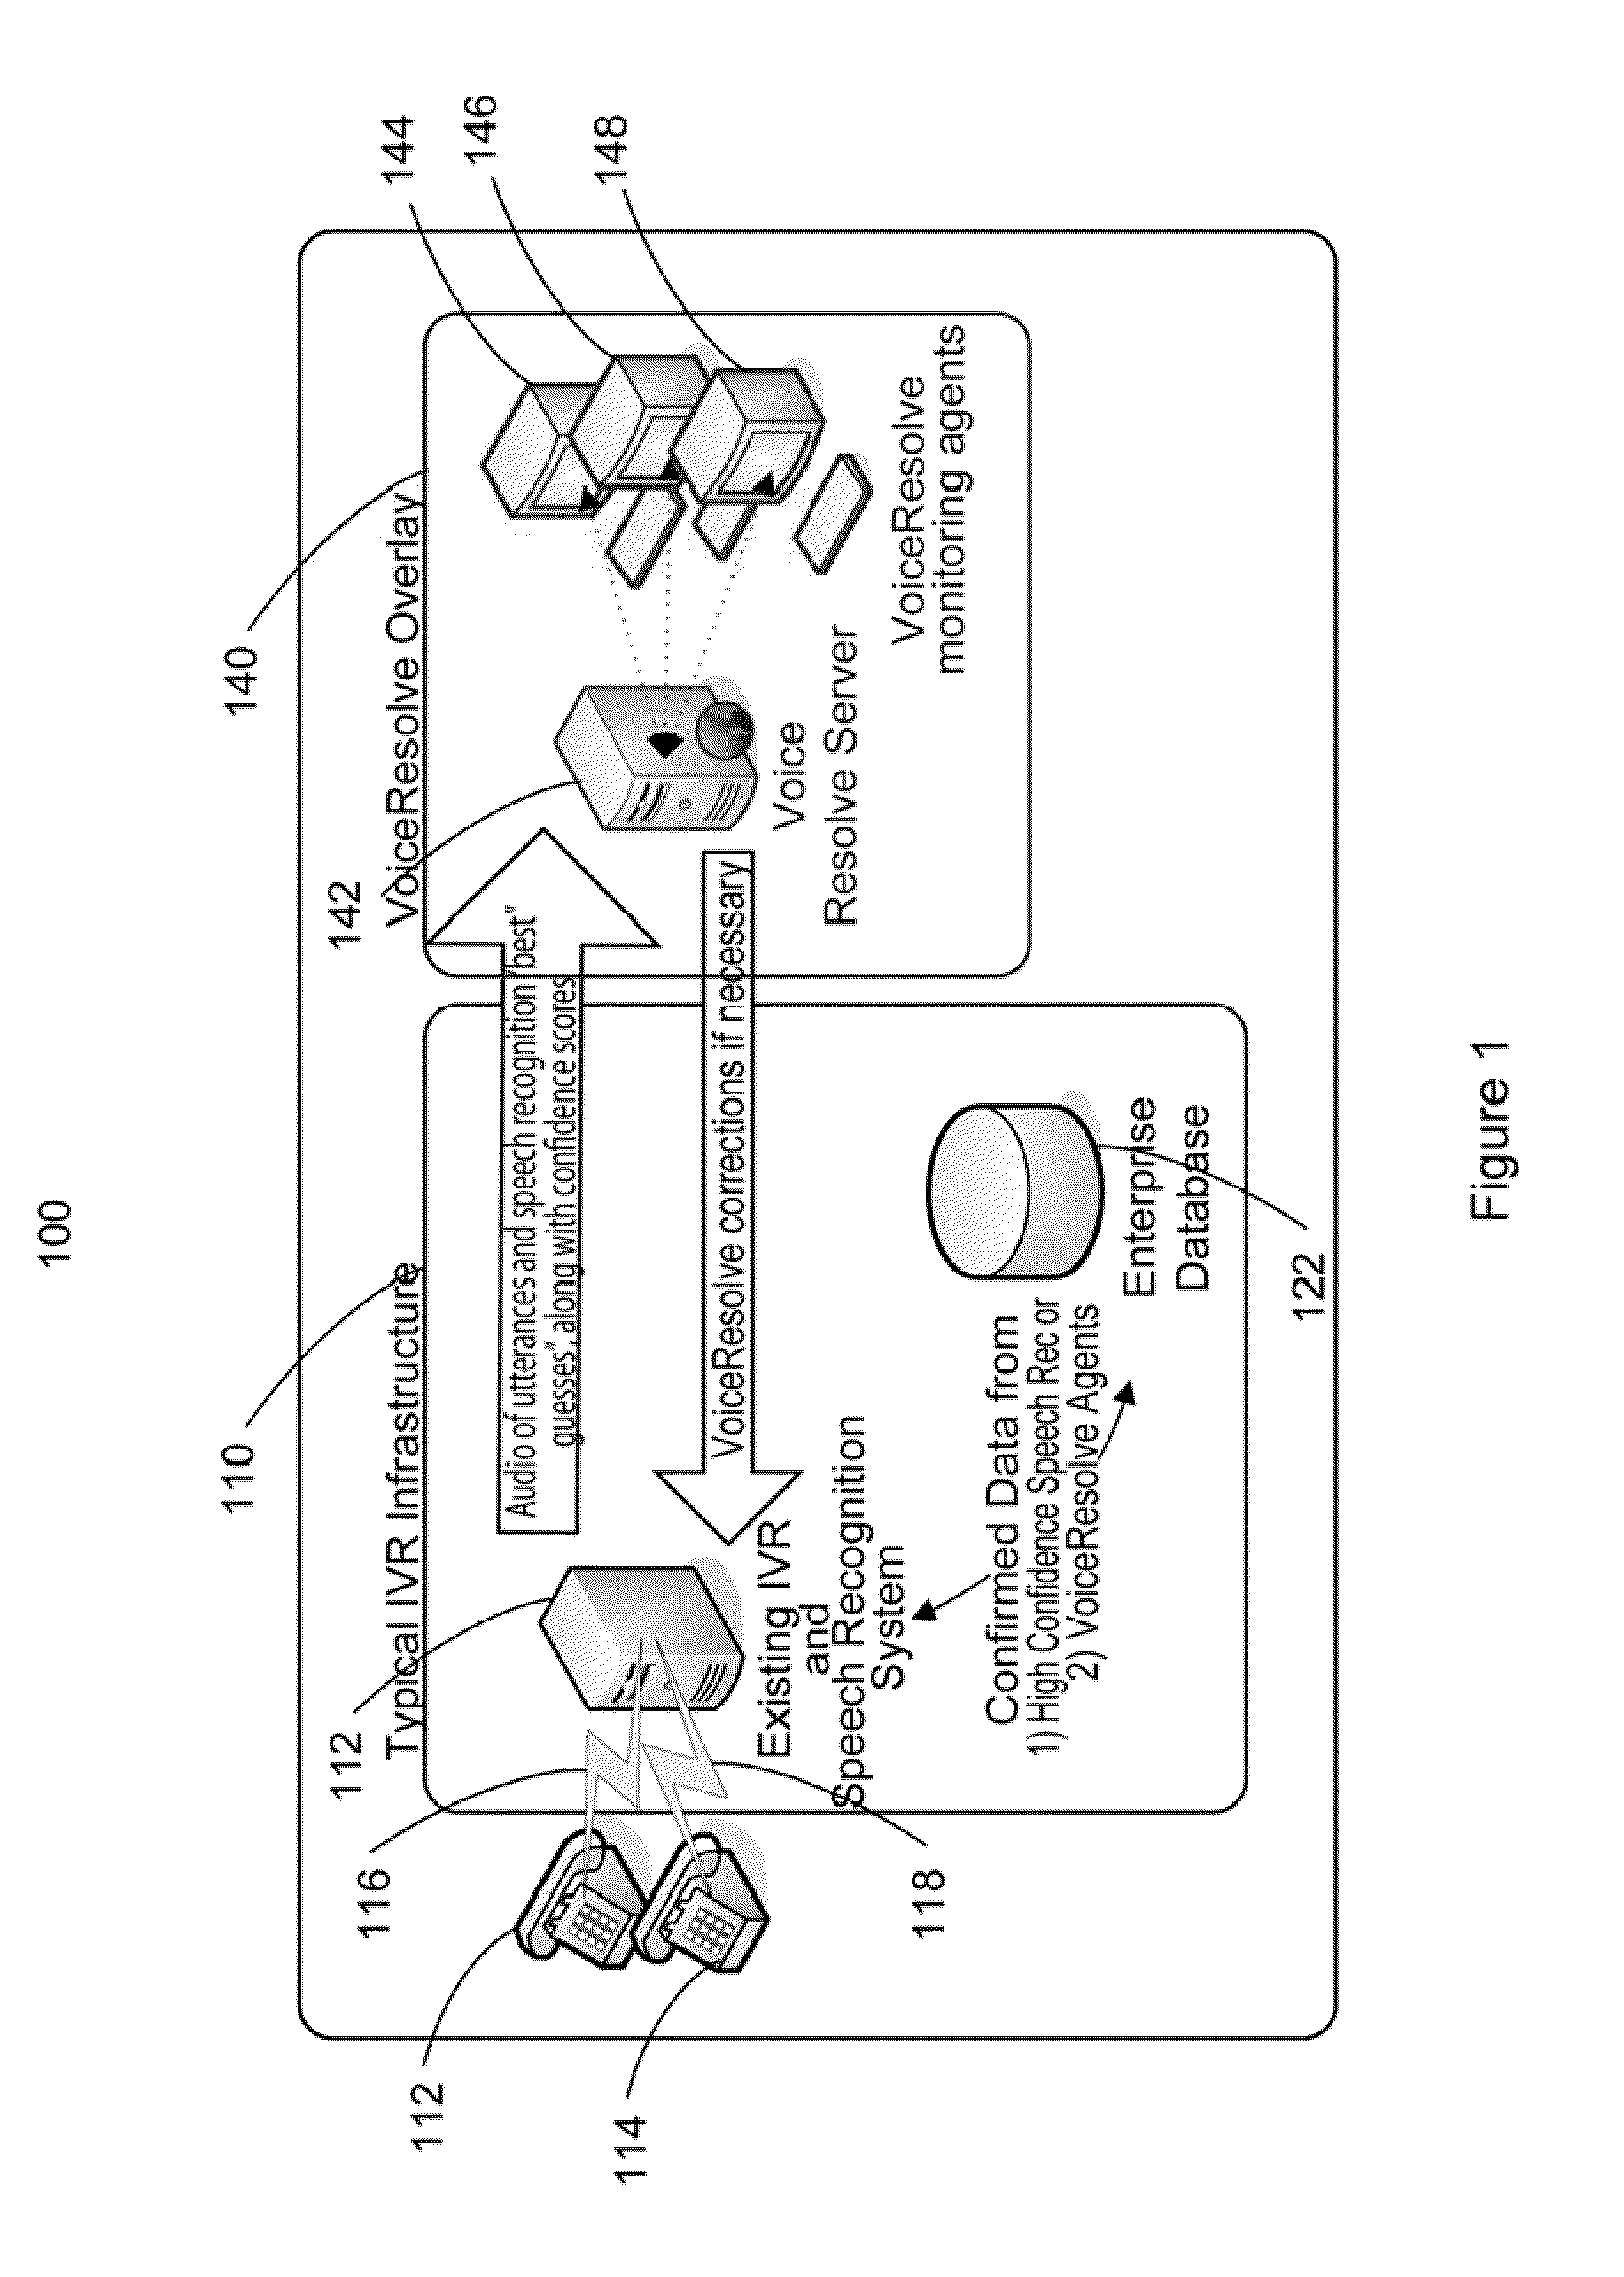 Interactive voice response system and method with common interface and intelligent agent monitoring